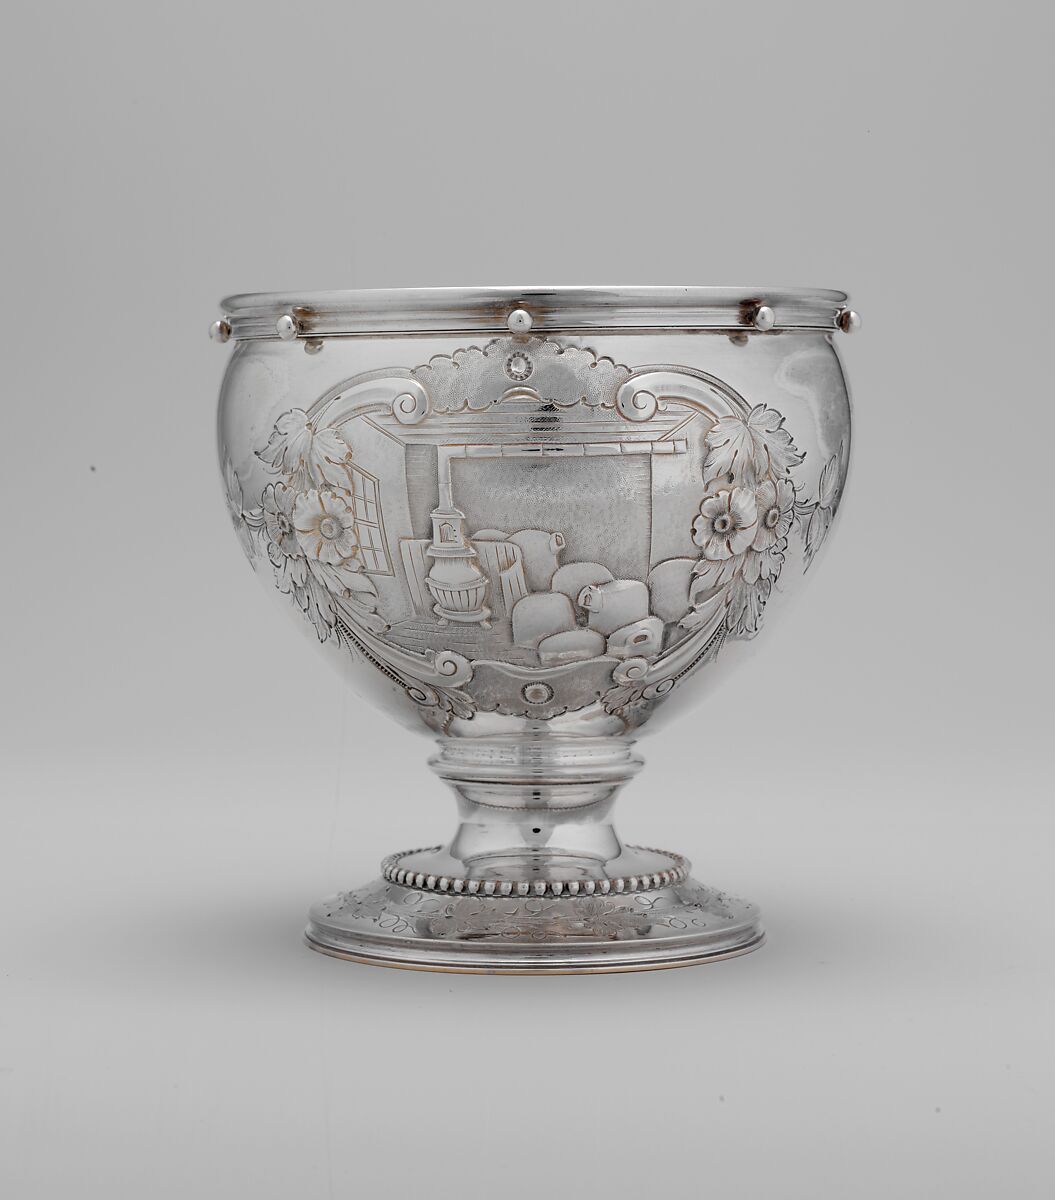 Slop bowl, Wood and Hughes (1845–99), Silver, American 